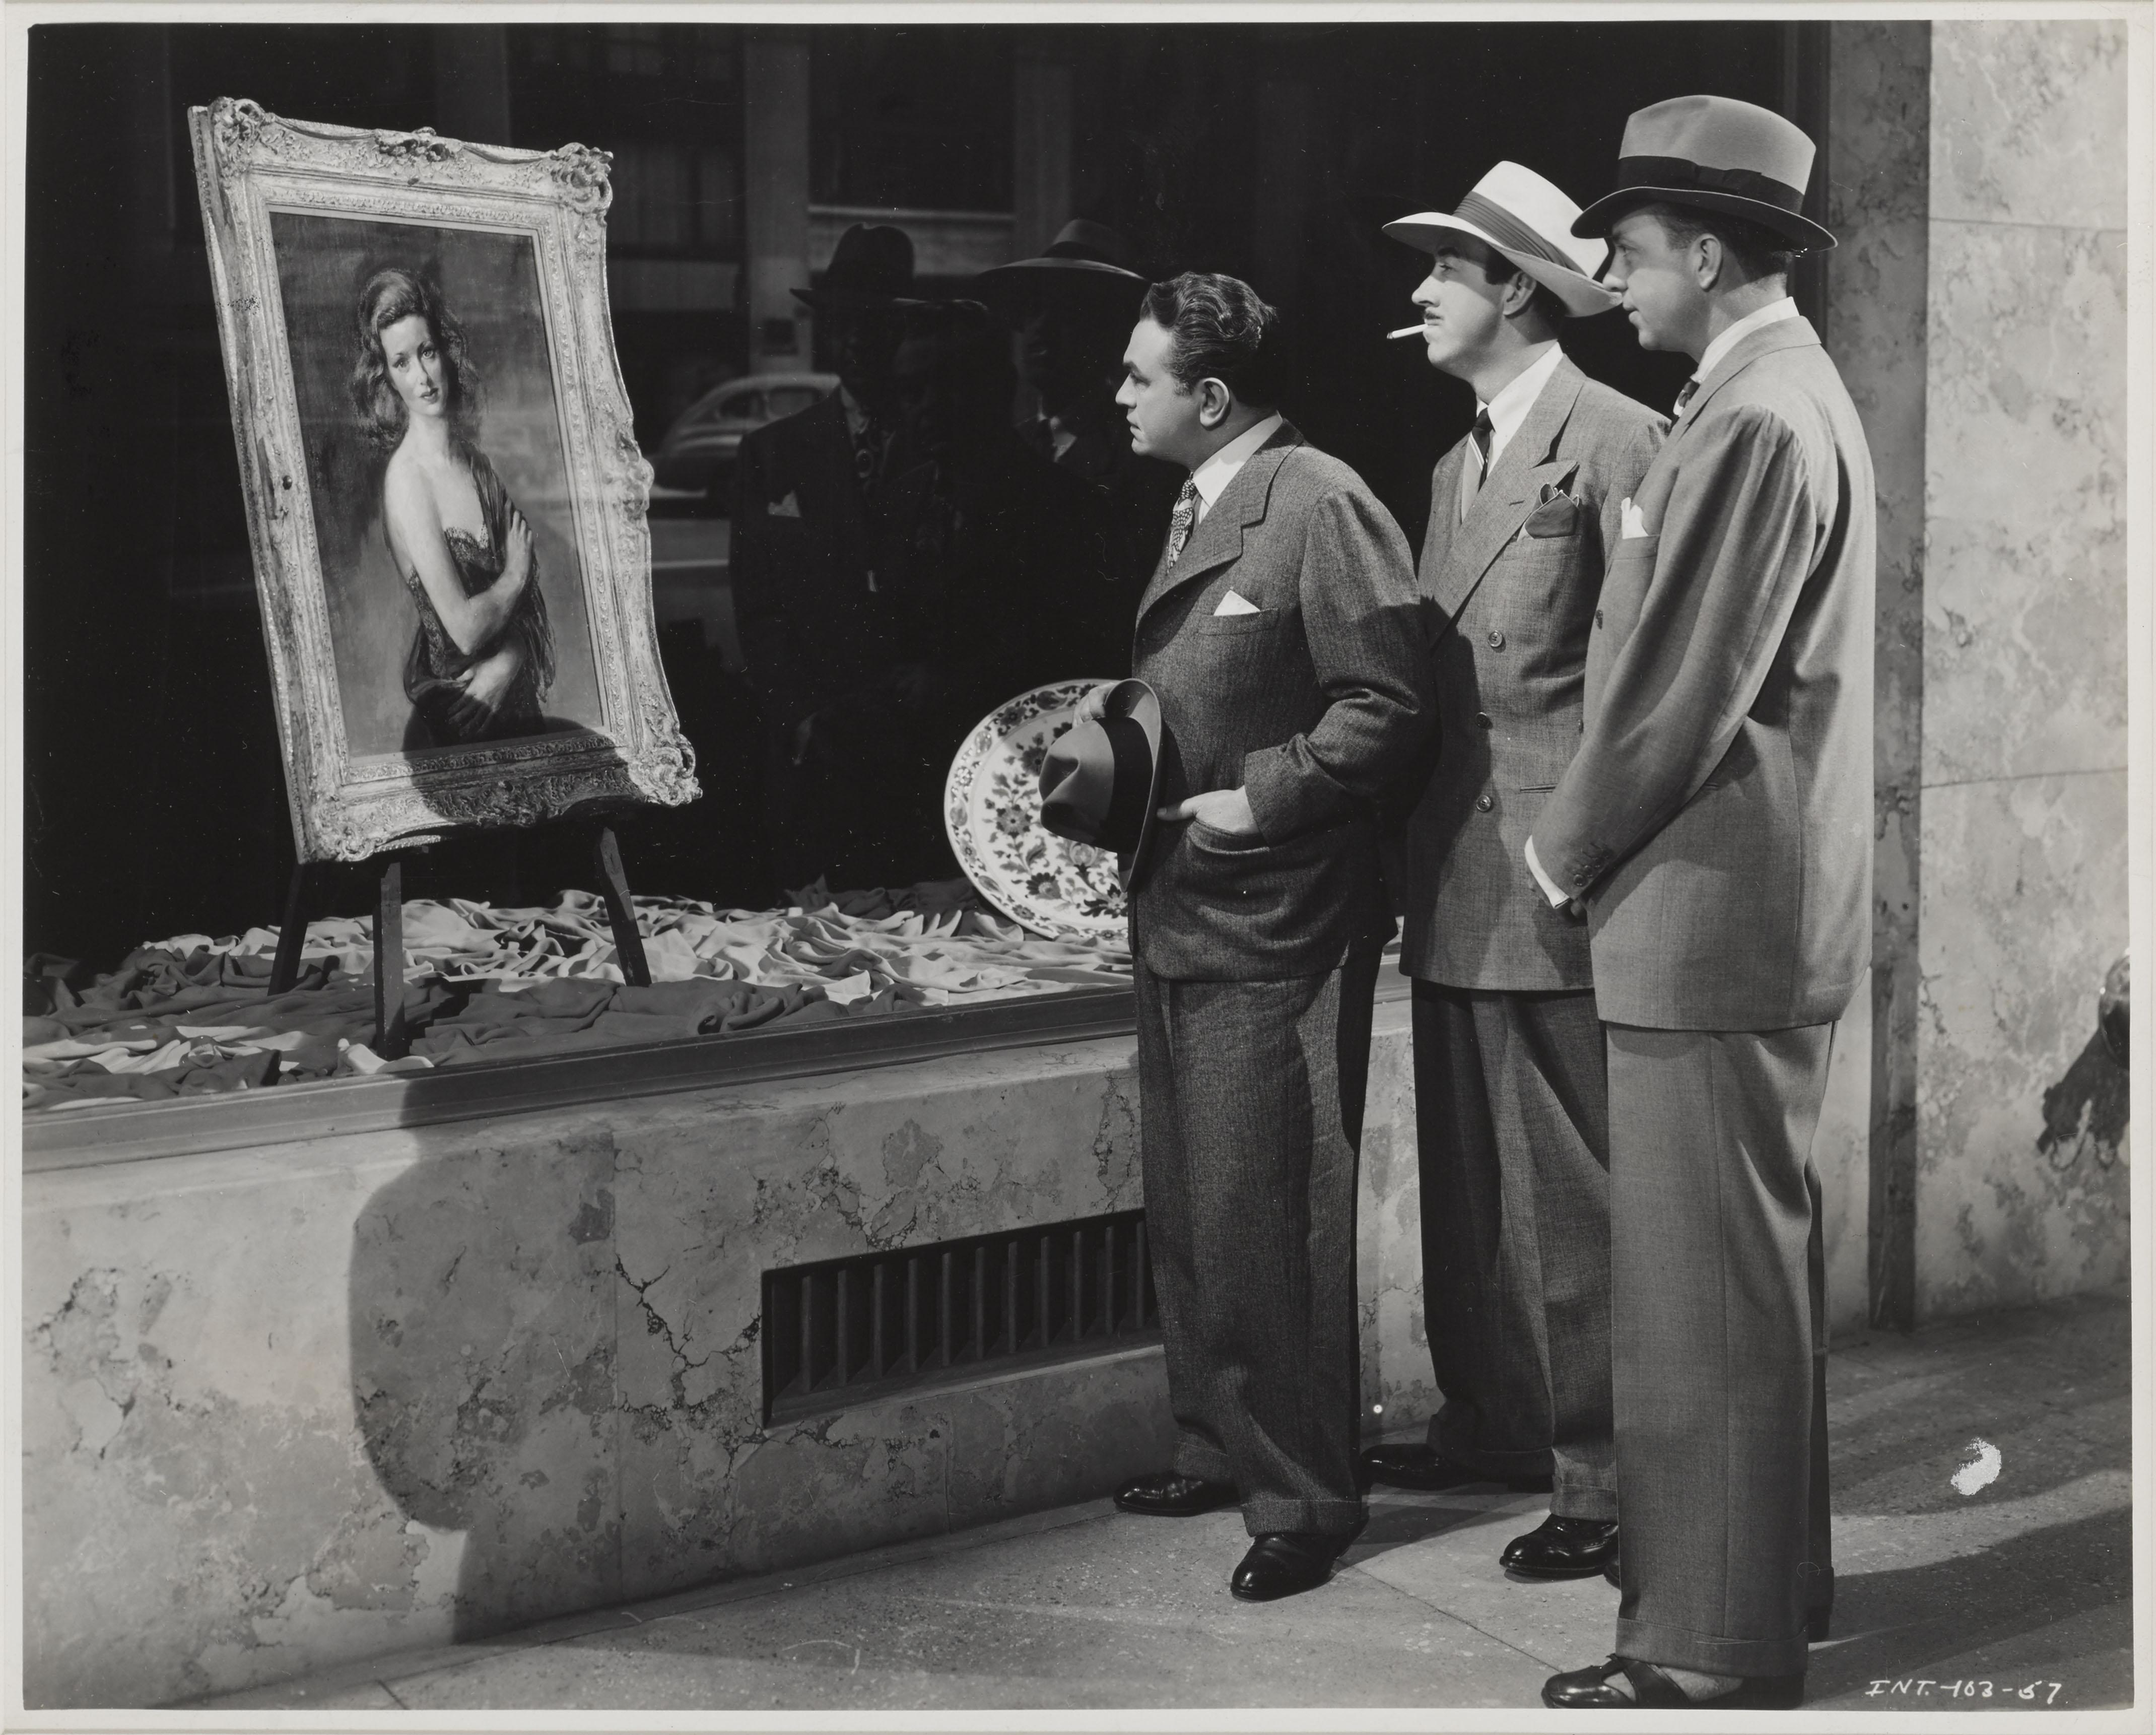 Original Us Original production still for the 1944 Film Noir The Woman In The Window directed by Fritz Lang
and starring Edward G. Robinson, Joan Bennett. The size given is before framing. This piece is conservation framed with UV plrexiglass and